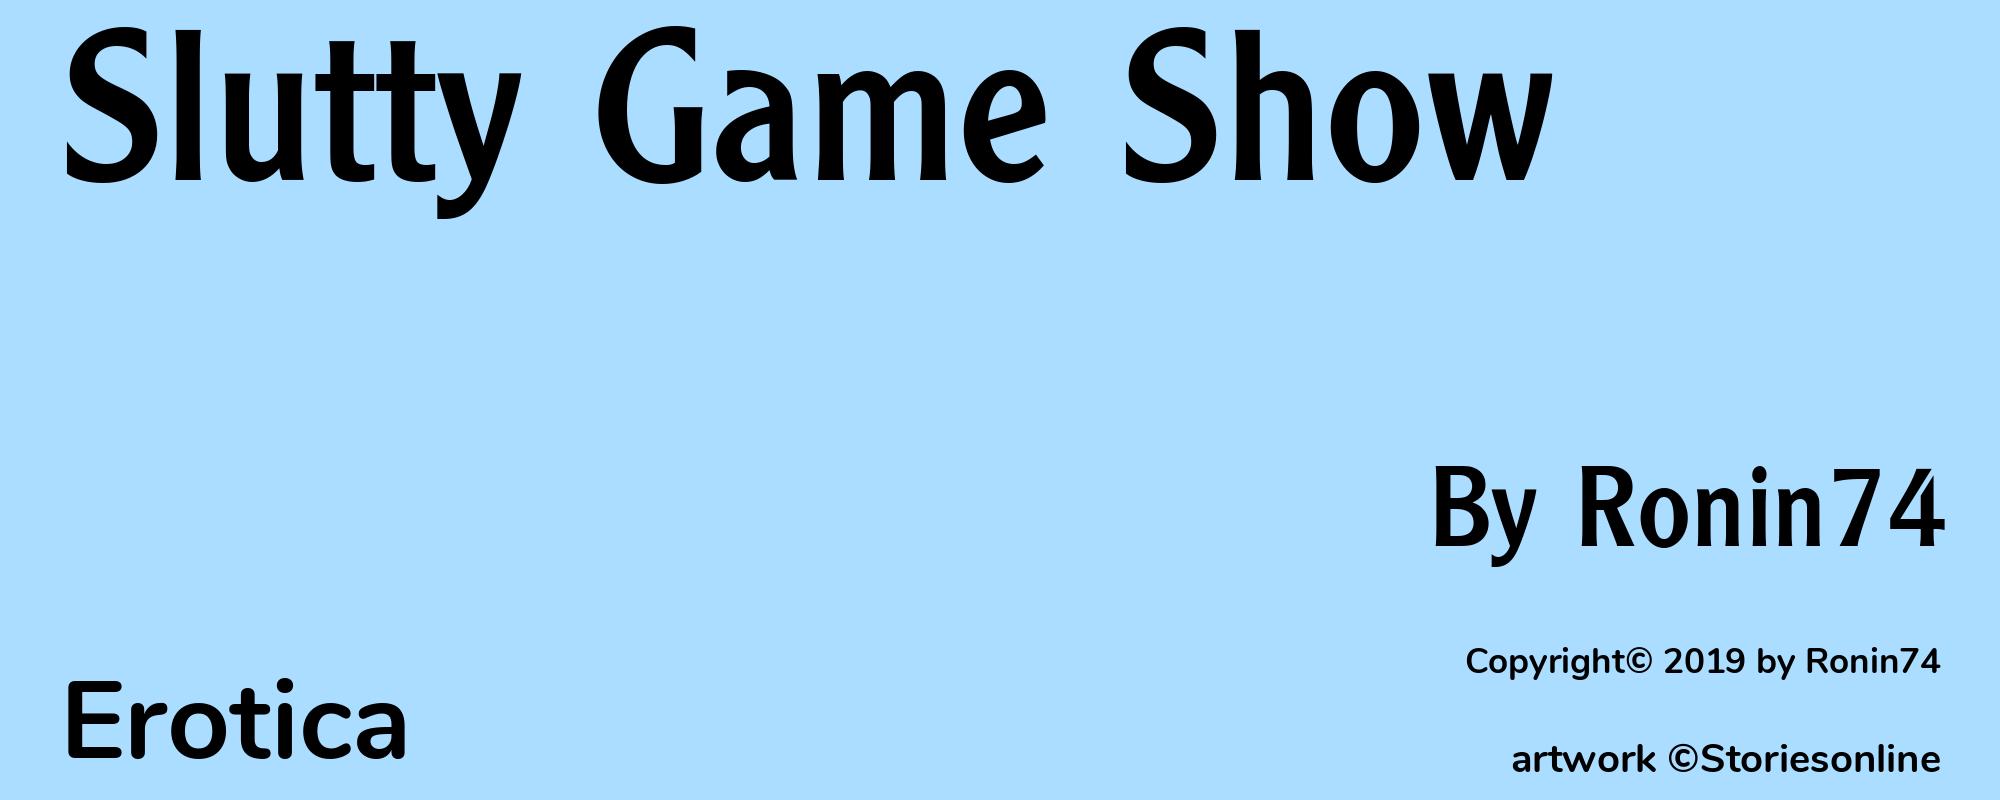 Slutty Game Show - Cover